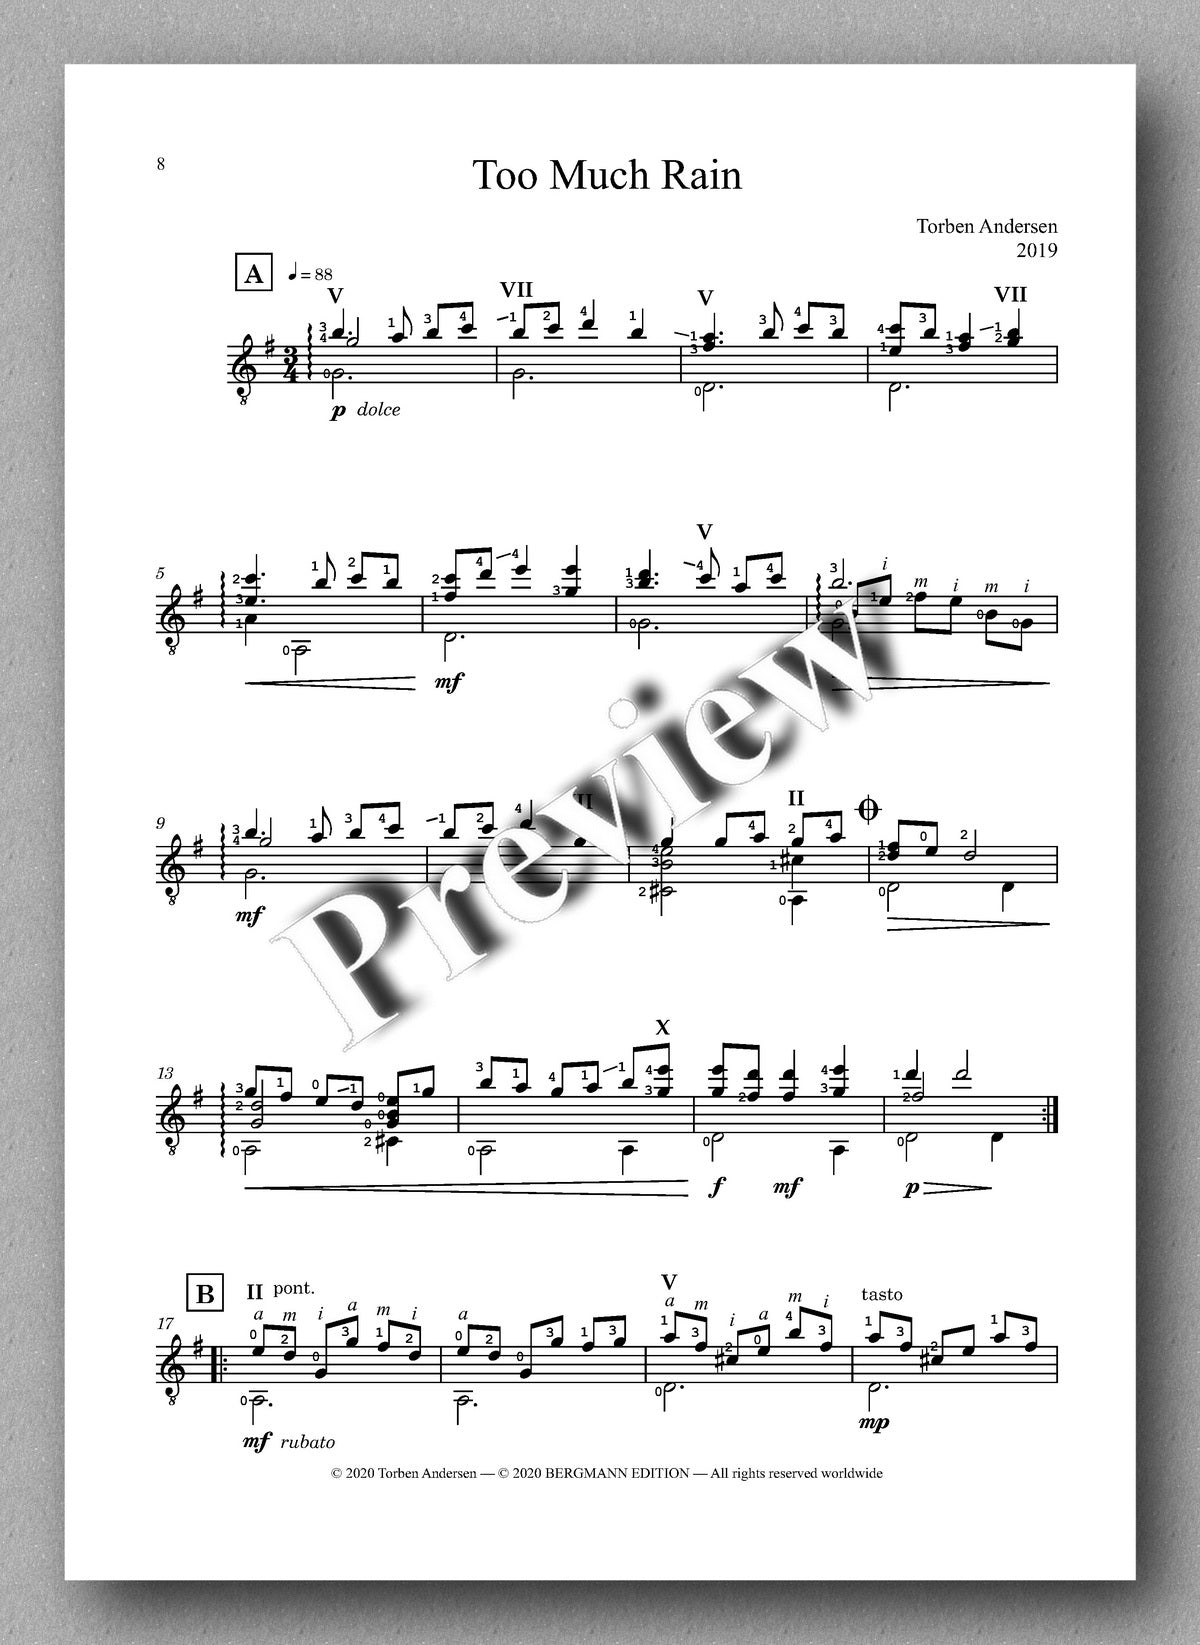 Torben Andersen, Twisted Moonbeams  - preview of the Music score 3